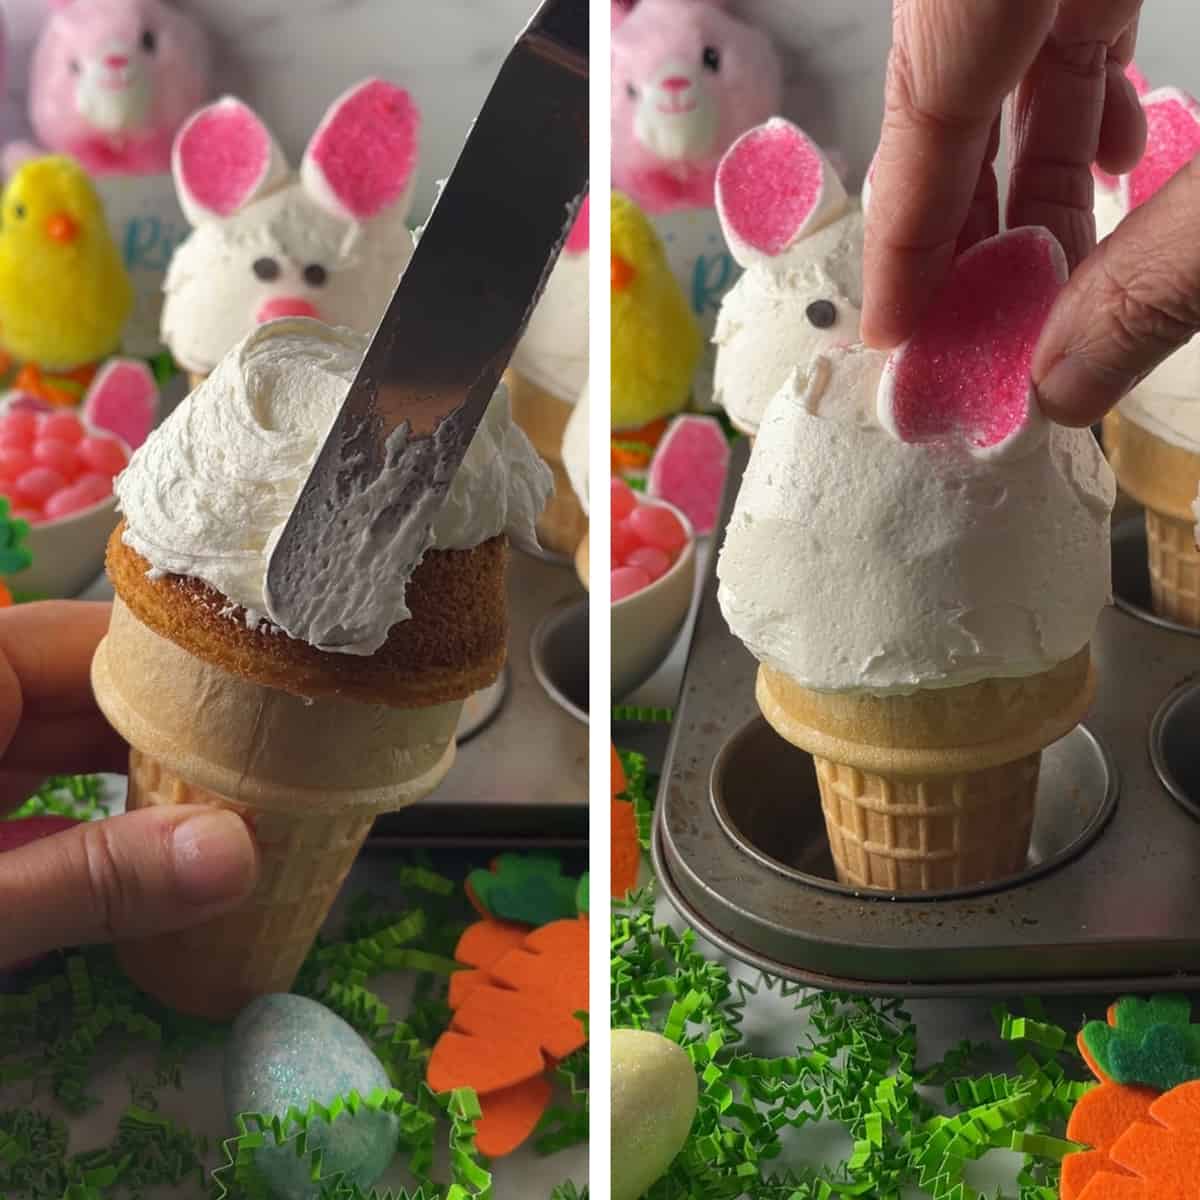 Frosting cupcake baked in ice cream cone then adding marshmallow bunnies on top.